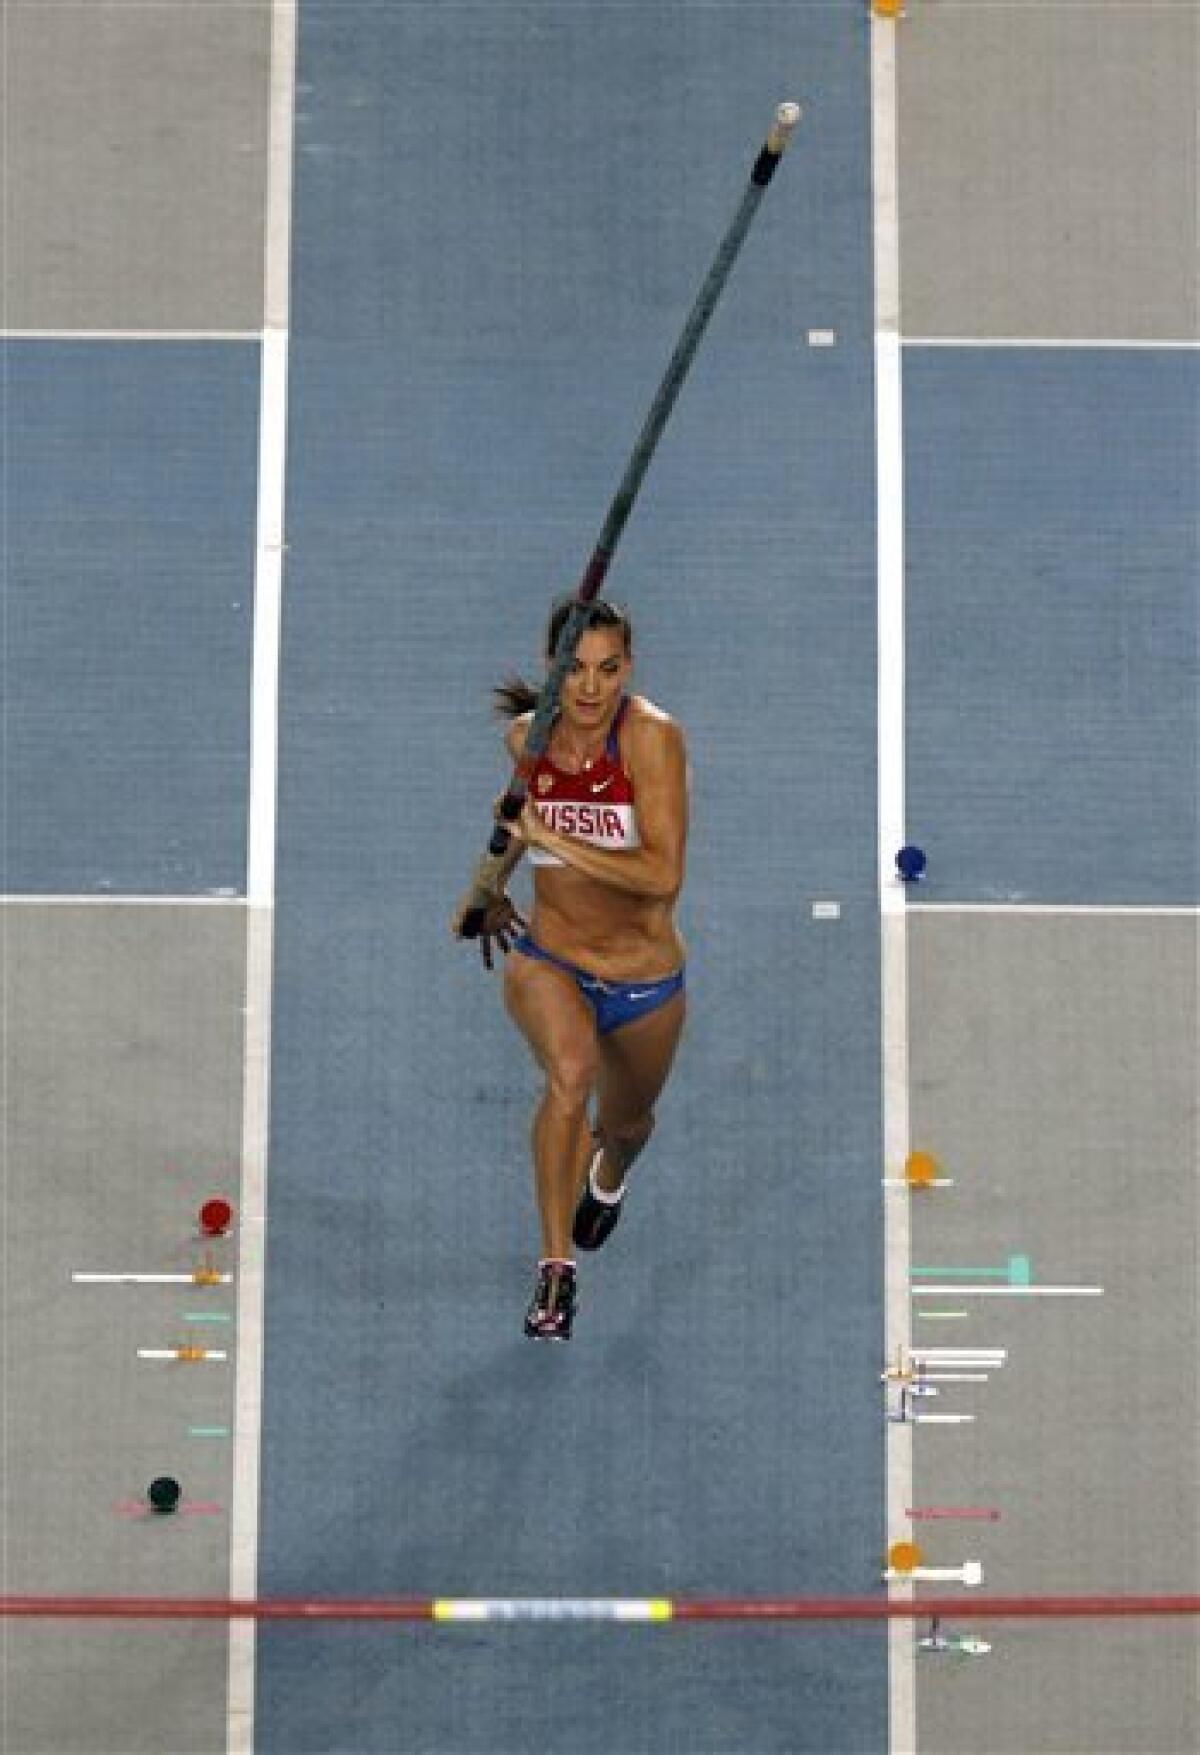 Russia's Yelena Isinbayeva makes an attempt in the Women's Pole Vault final .at the World Athletics Championships in Daegu, South Korea, Tuesday, Aug. 30, 2011.(AP Photo/Kevin Frayer)